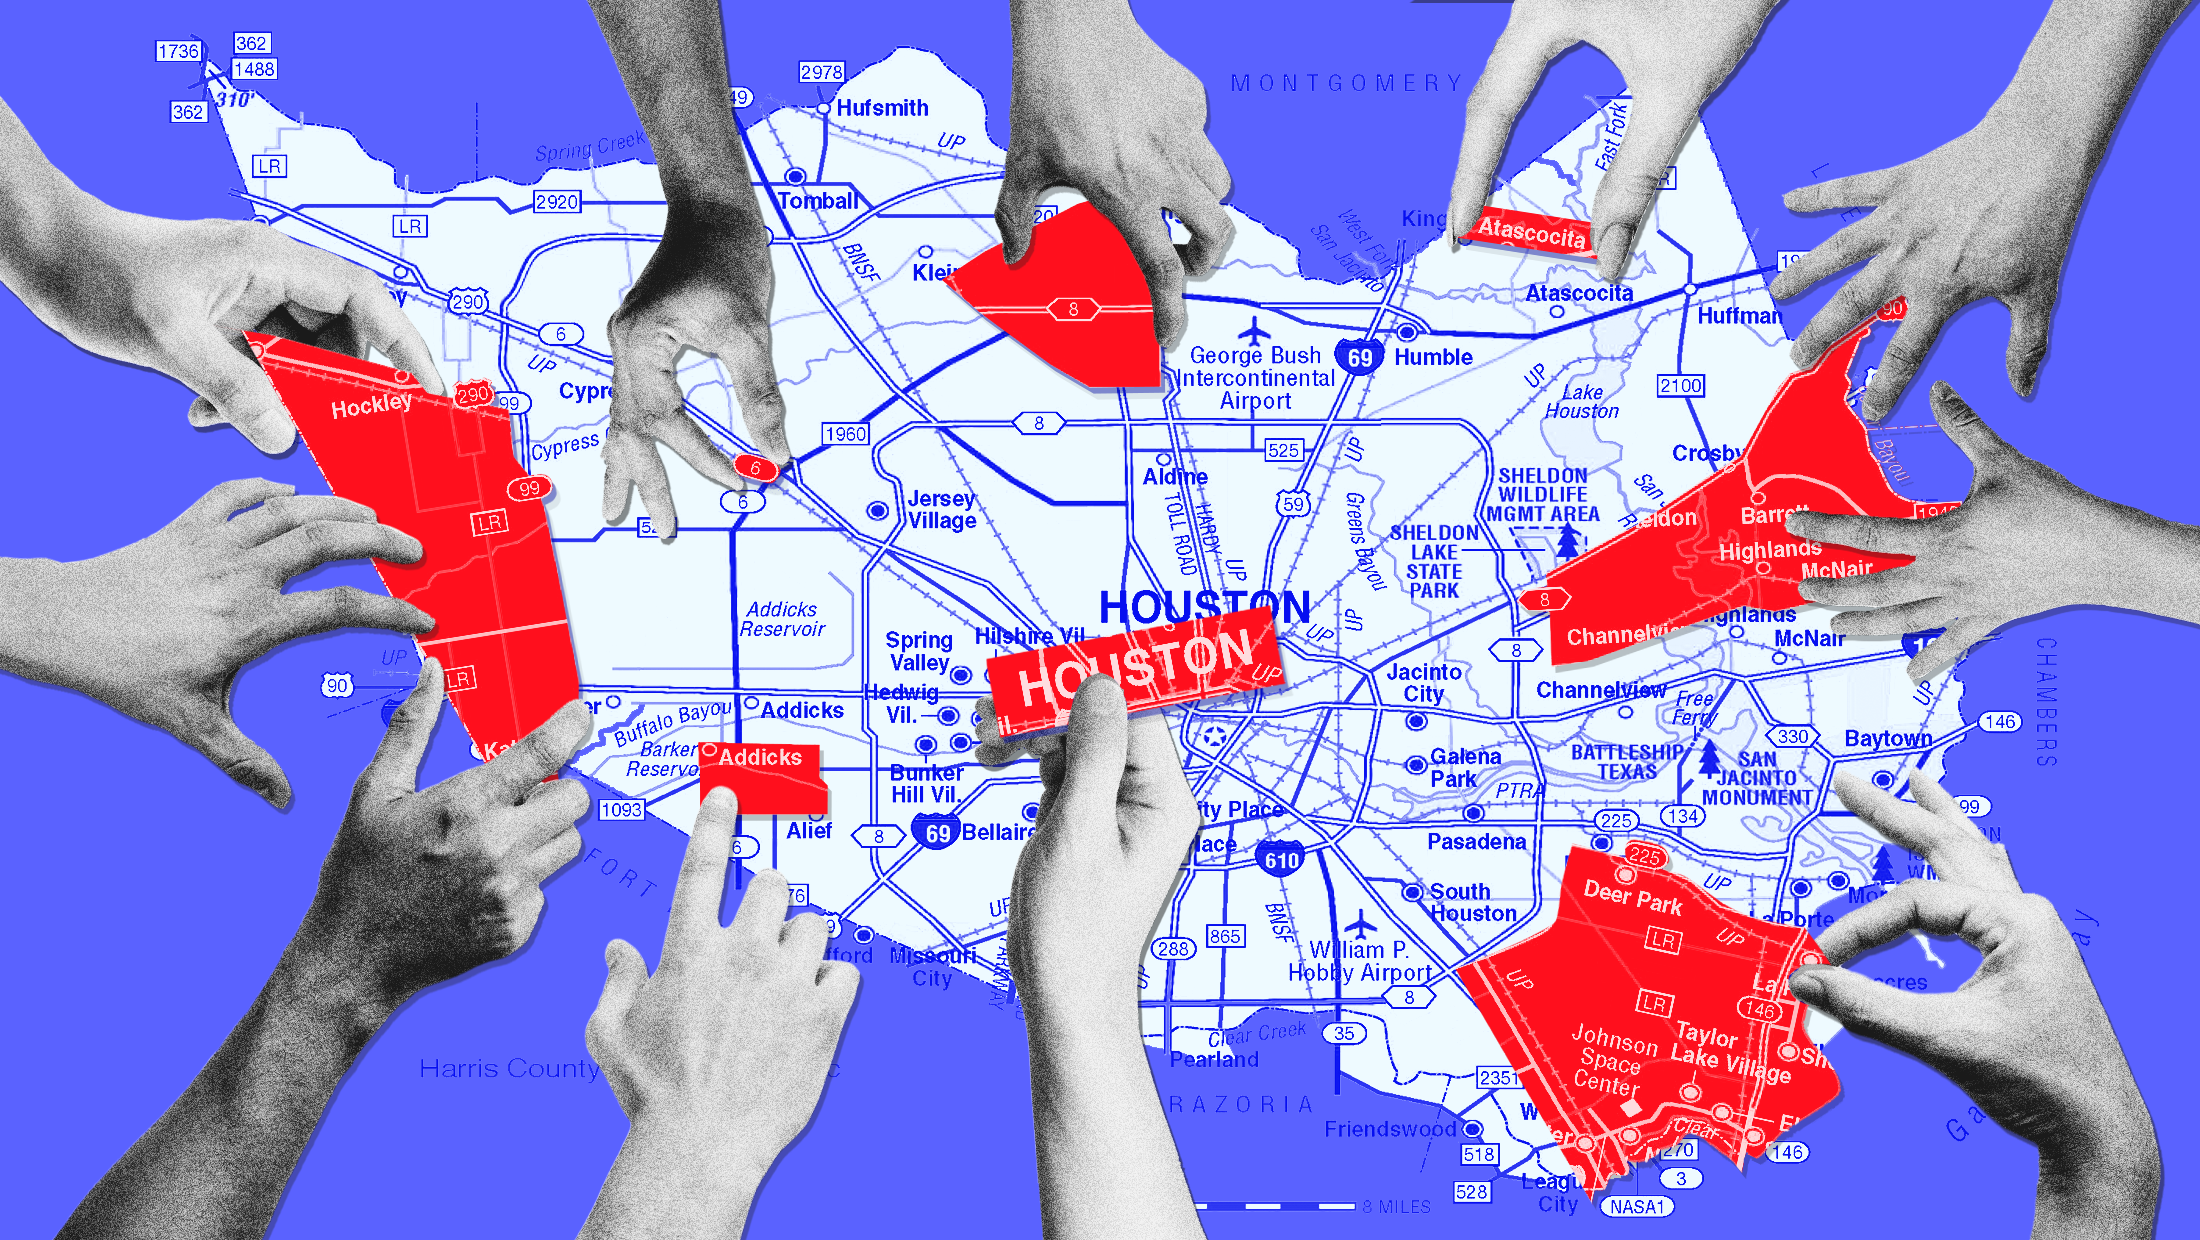 A blue map of Harris County surrounded by hands grabbing red colored pieces of it.